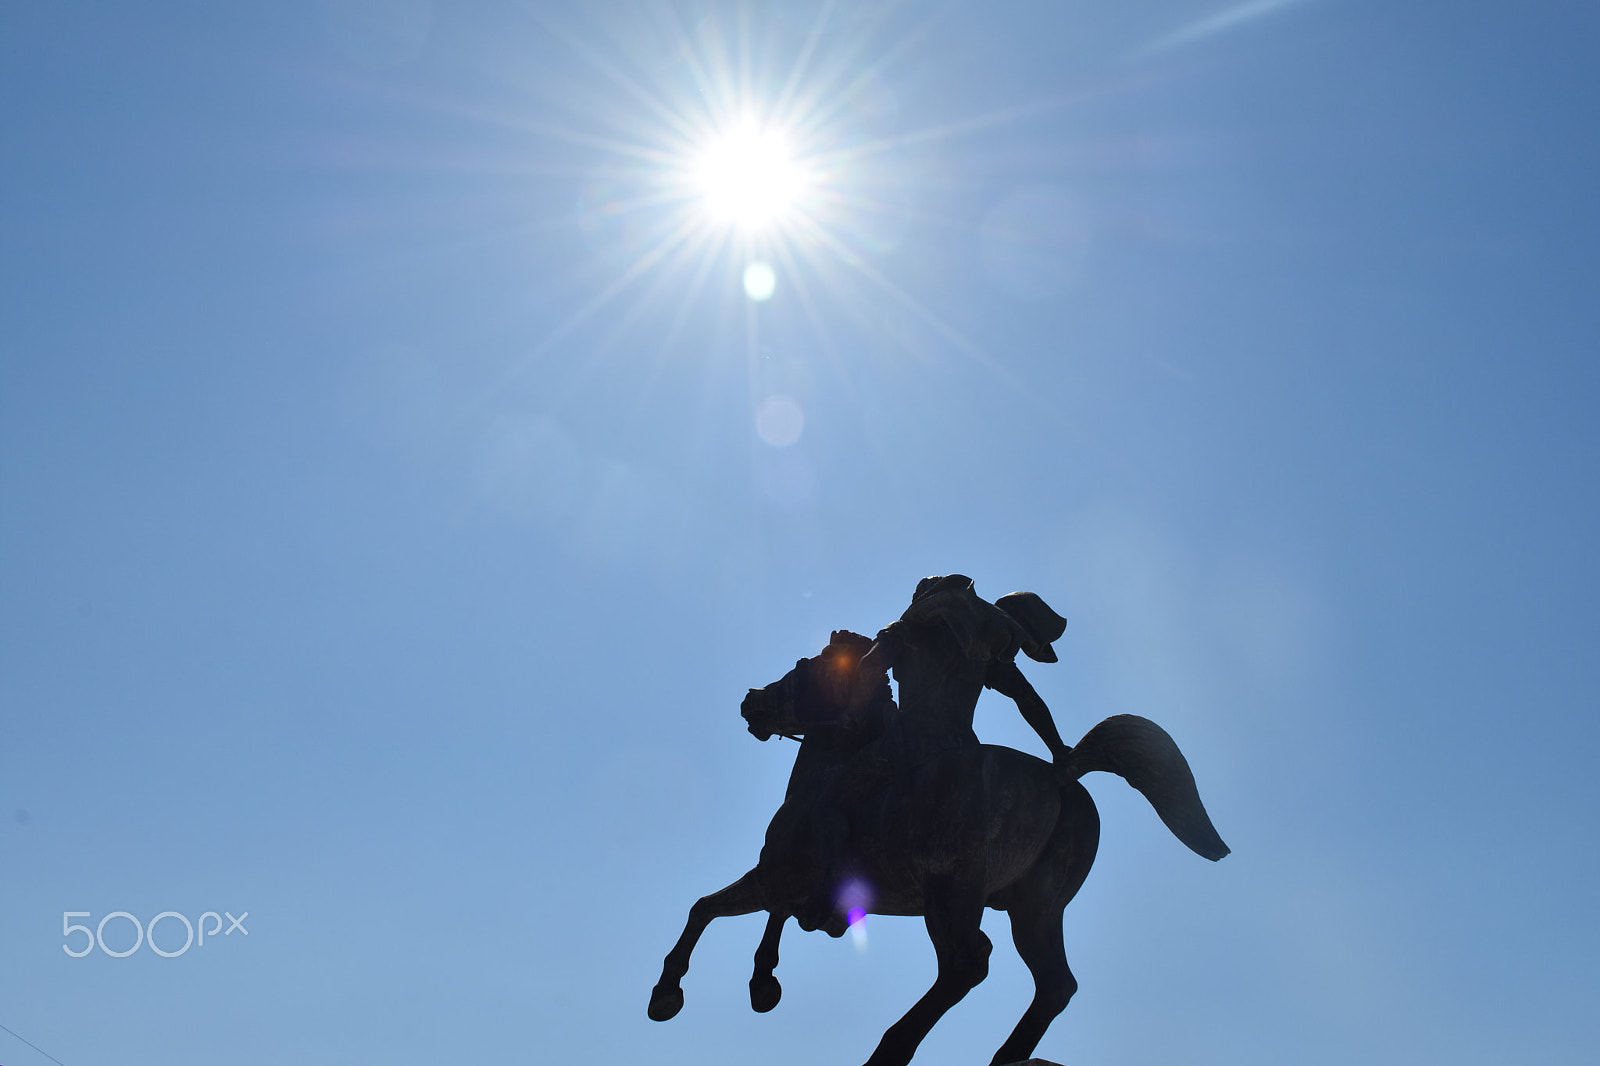 Nikon D7200 sample photo. "alexander the great" riding in the air photography